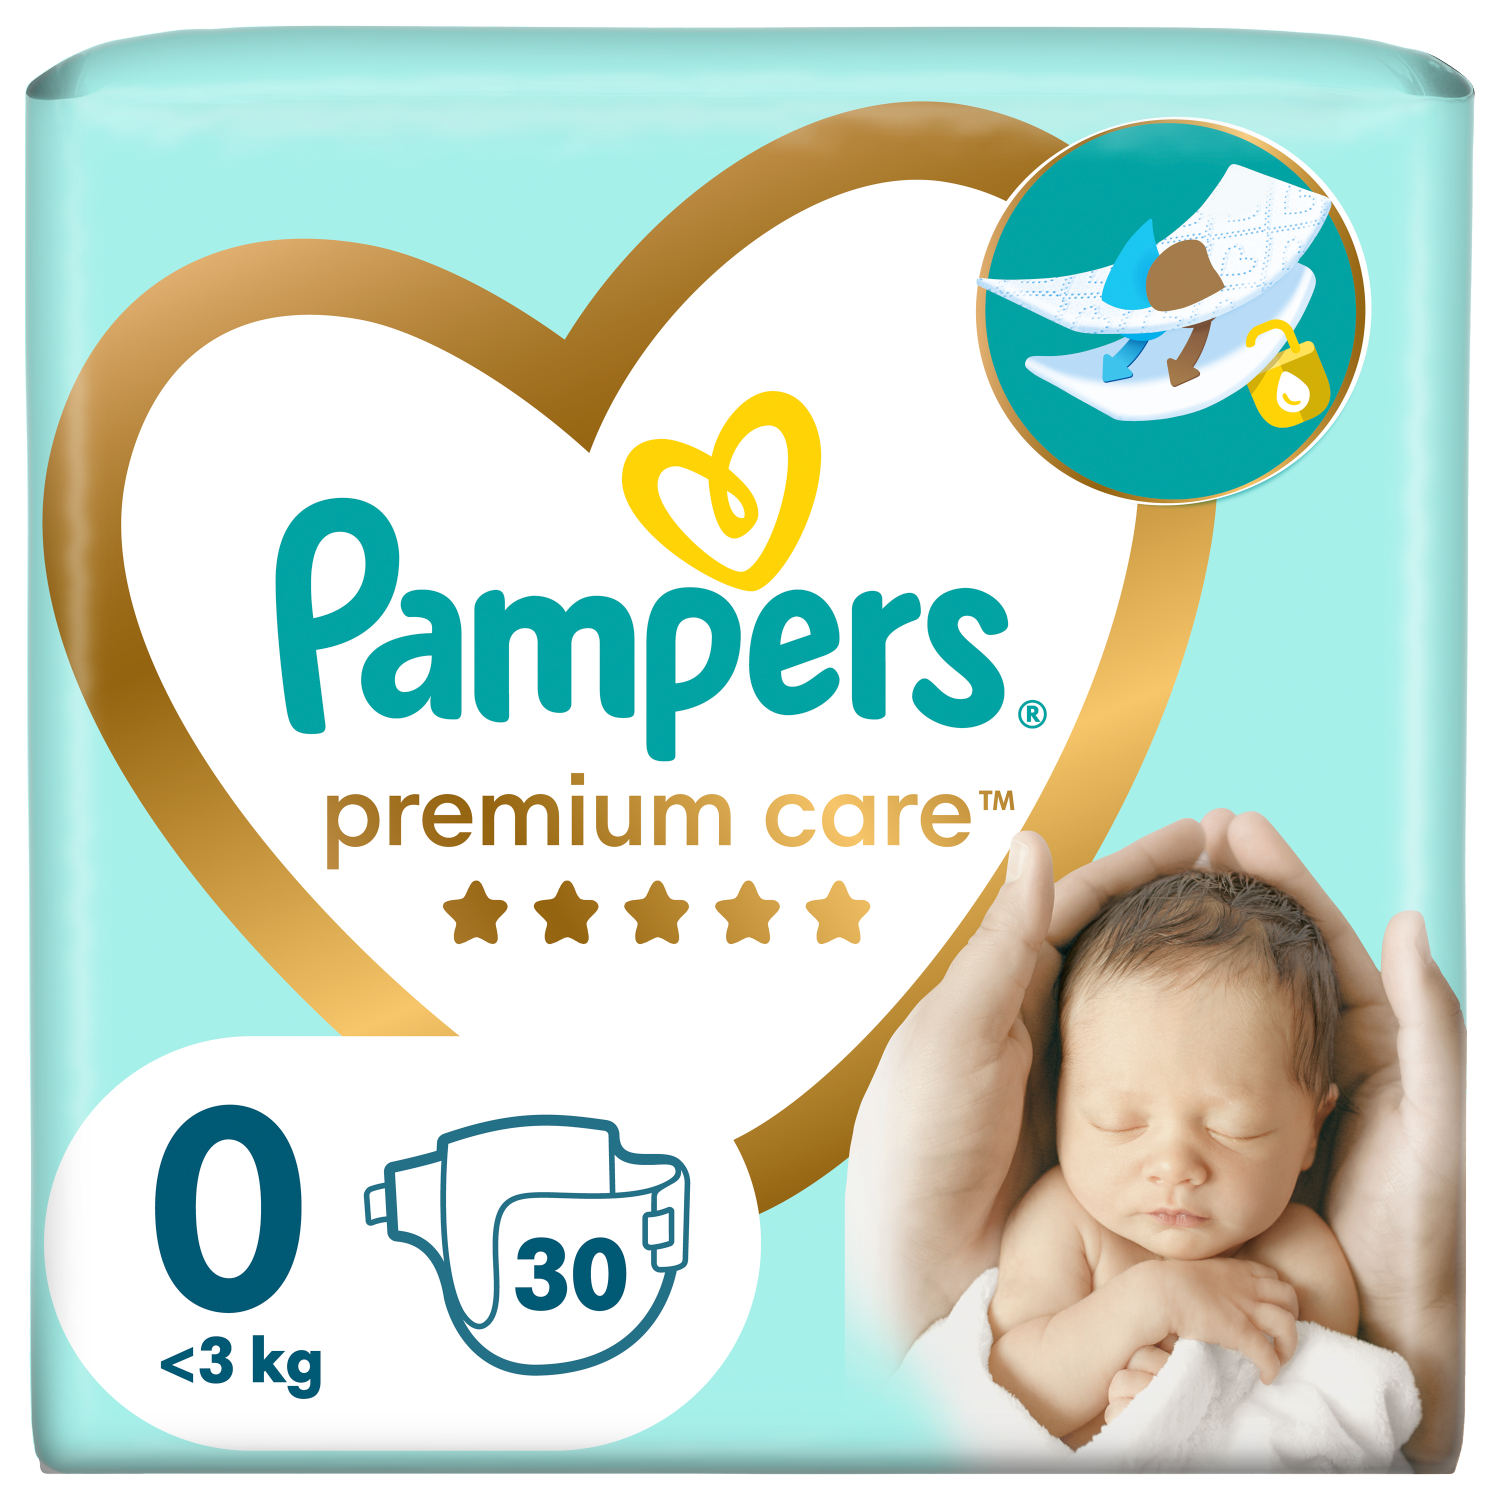 pampers rozmiary